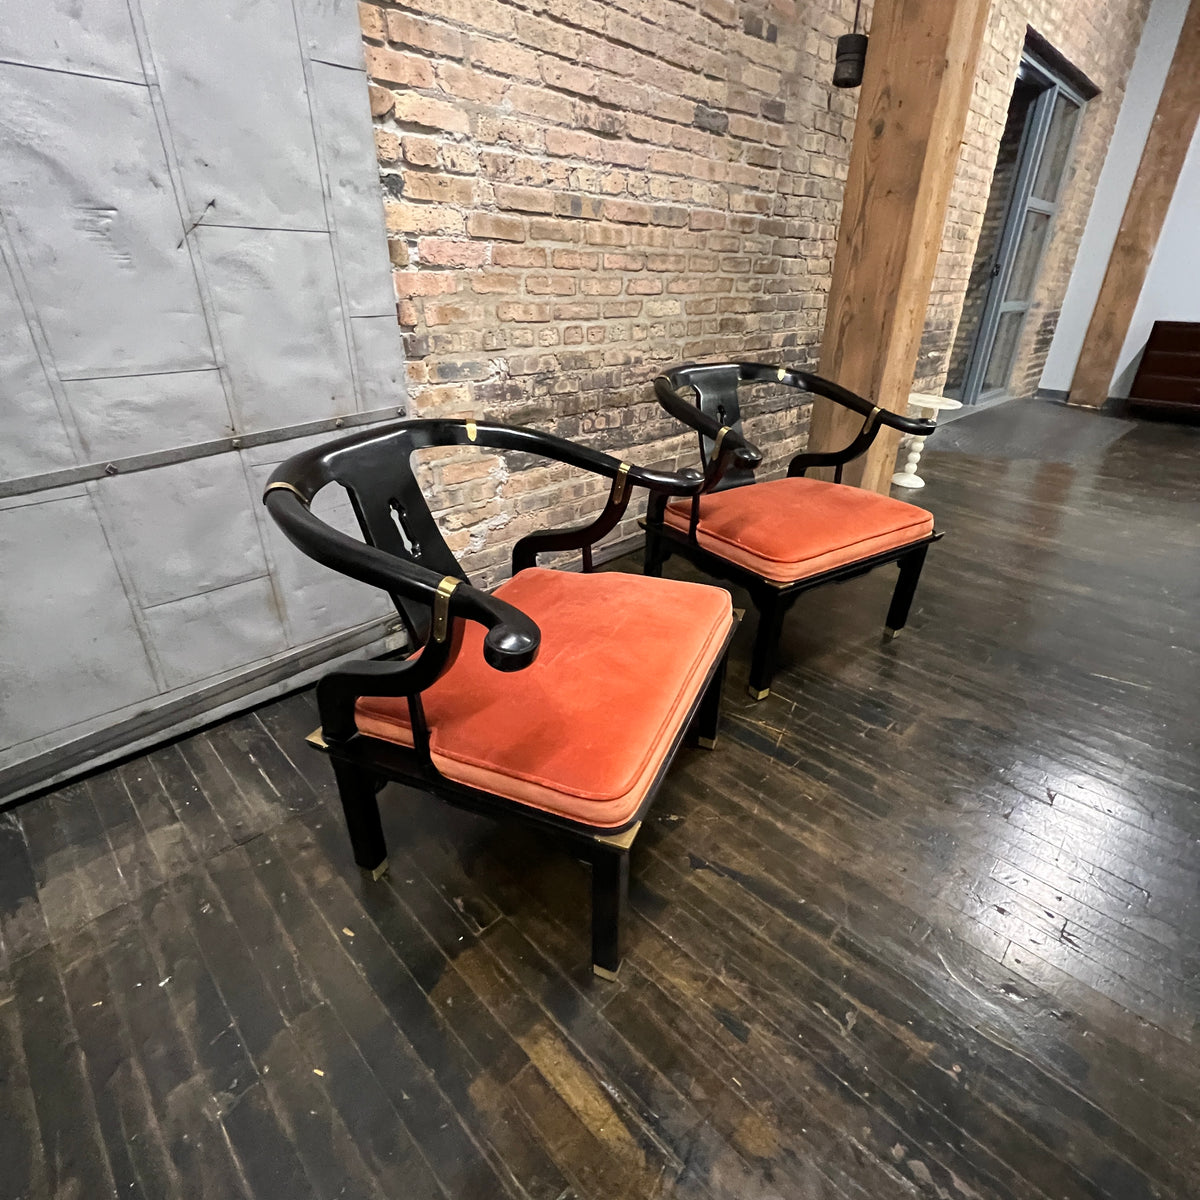 A lovely pair of large Chinese ming style horseshoe lounge chairs made by Century Furniture. Originally designed by James Mont these chairs epitomize his over the top dramatic mid-century modern style with a unique Asian flare. 